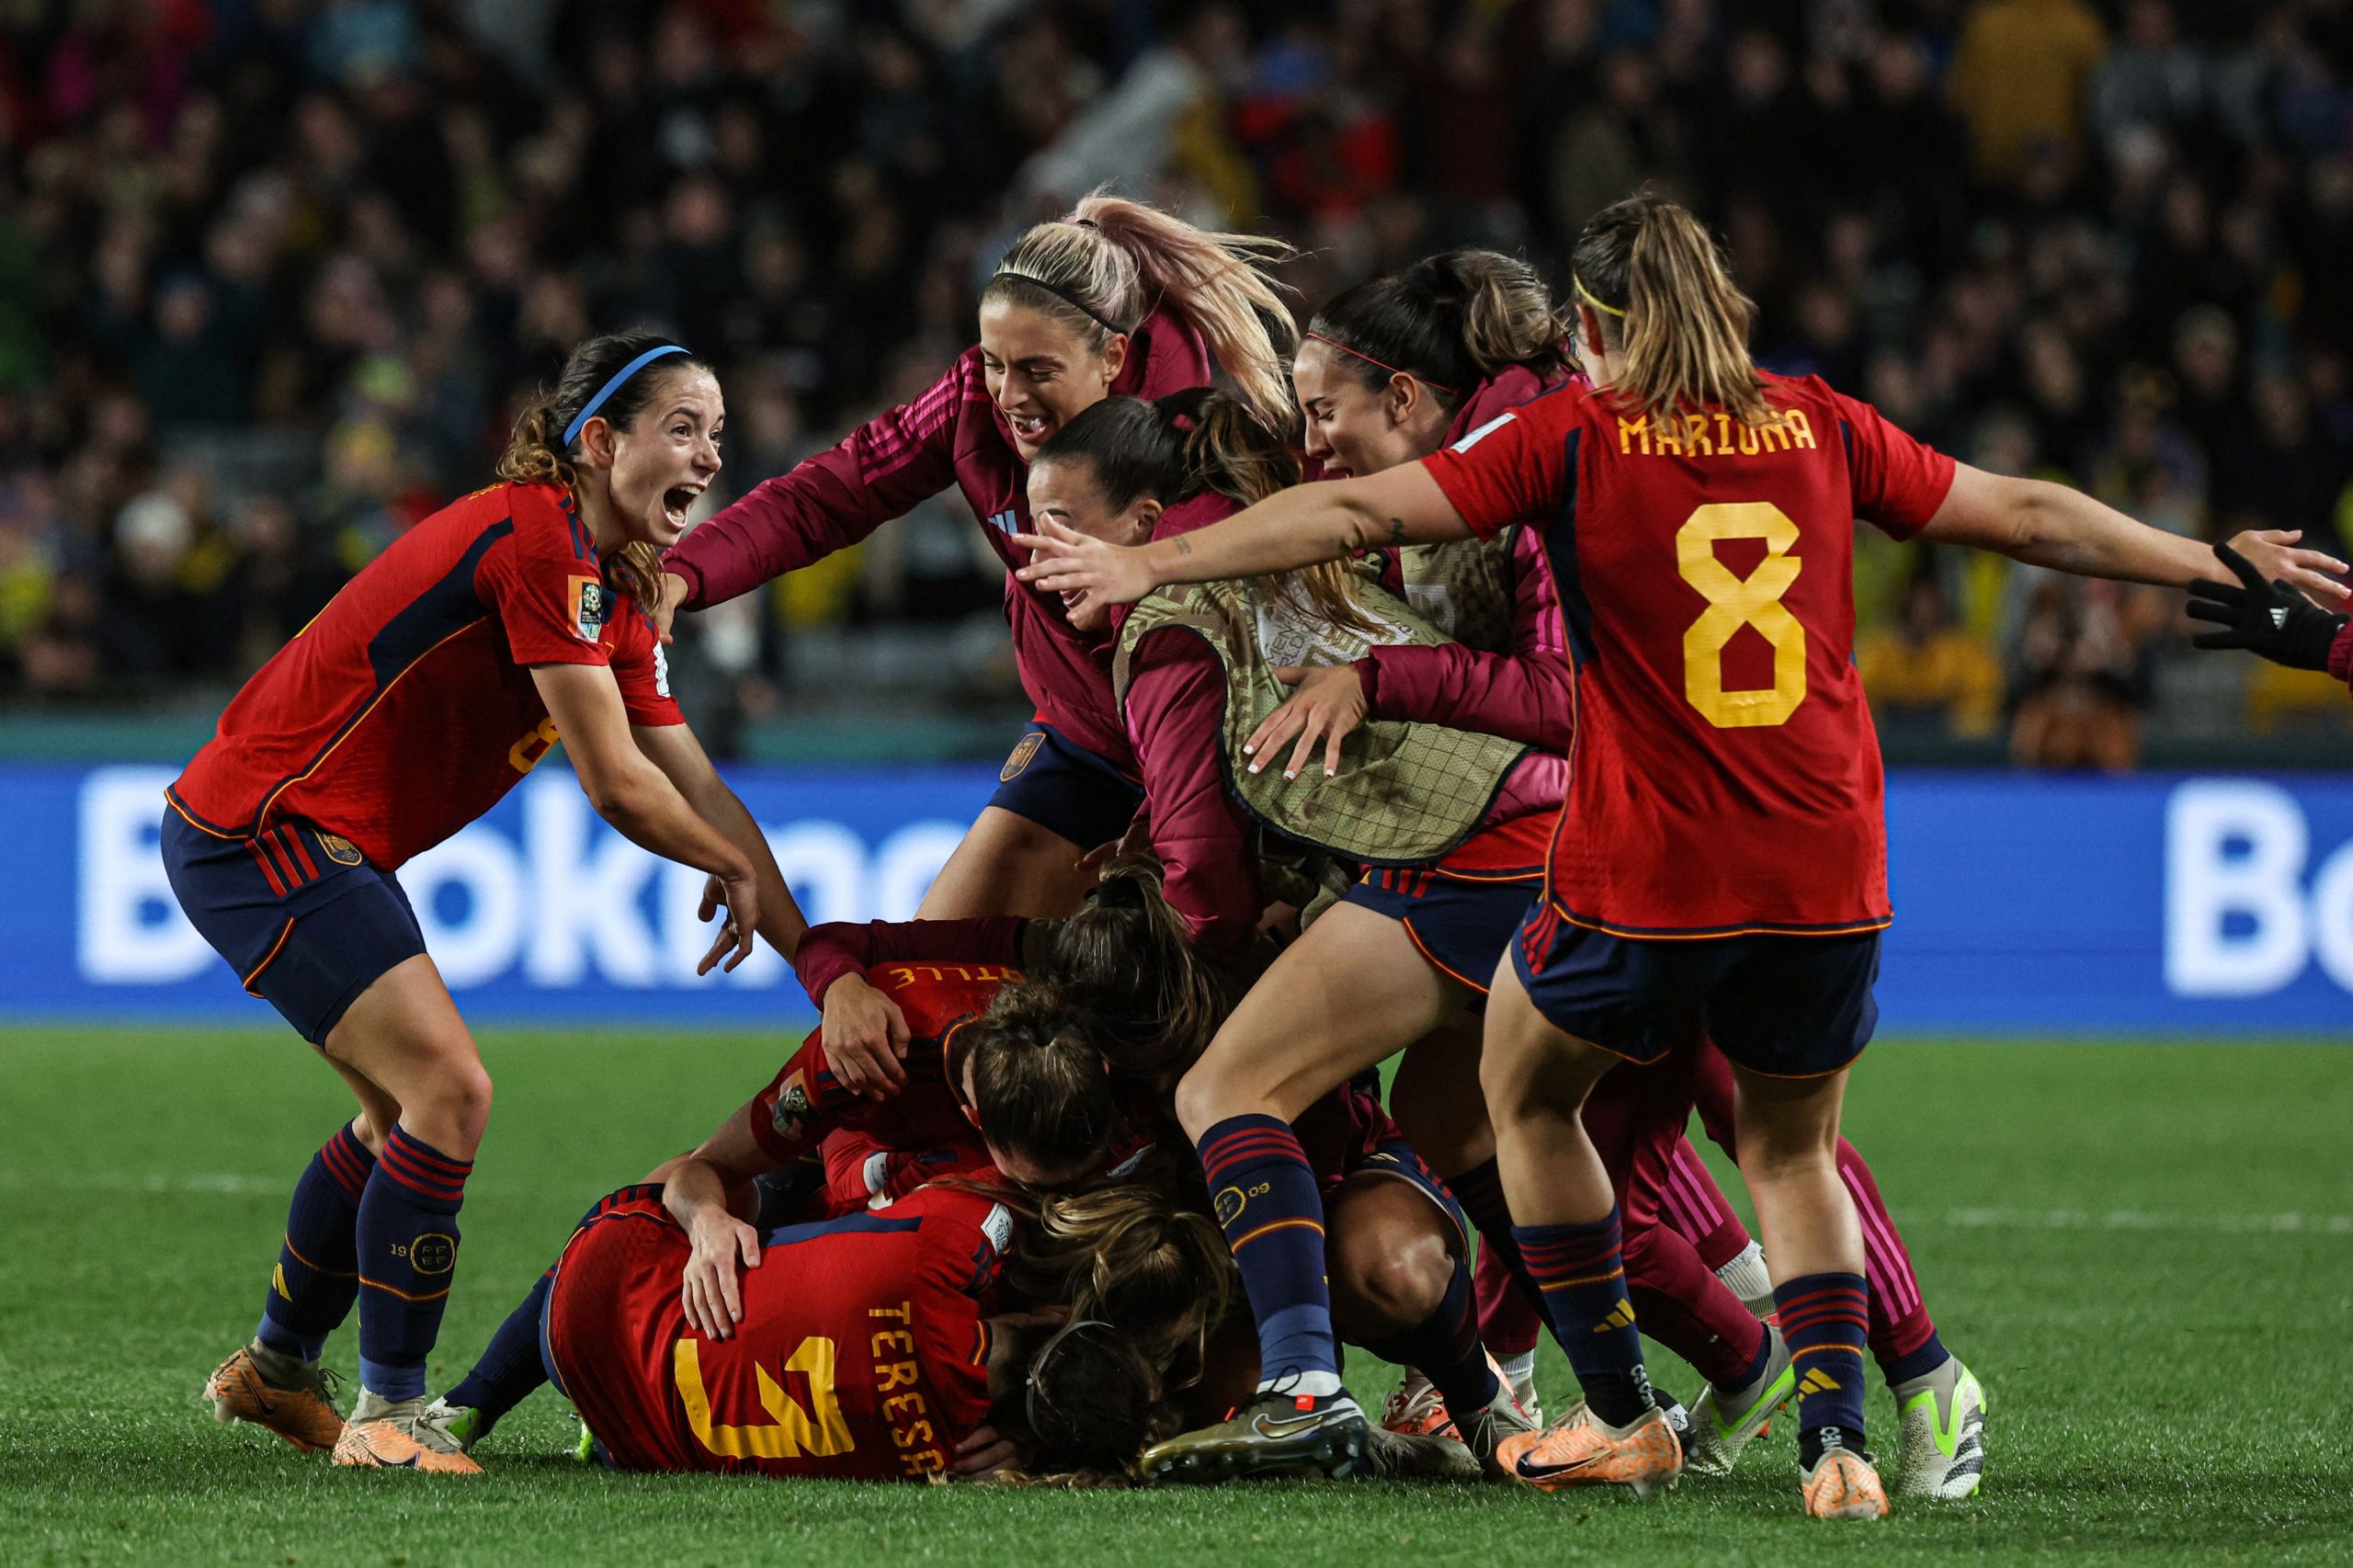 Espanha (Photo by MARTY MELVILLE/AFP via Getty Images)